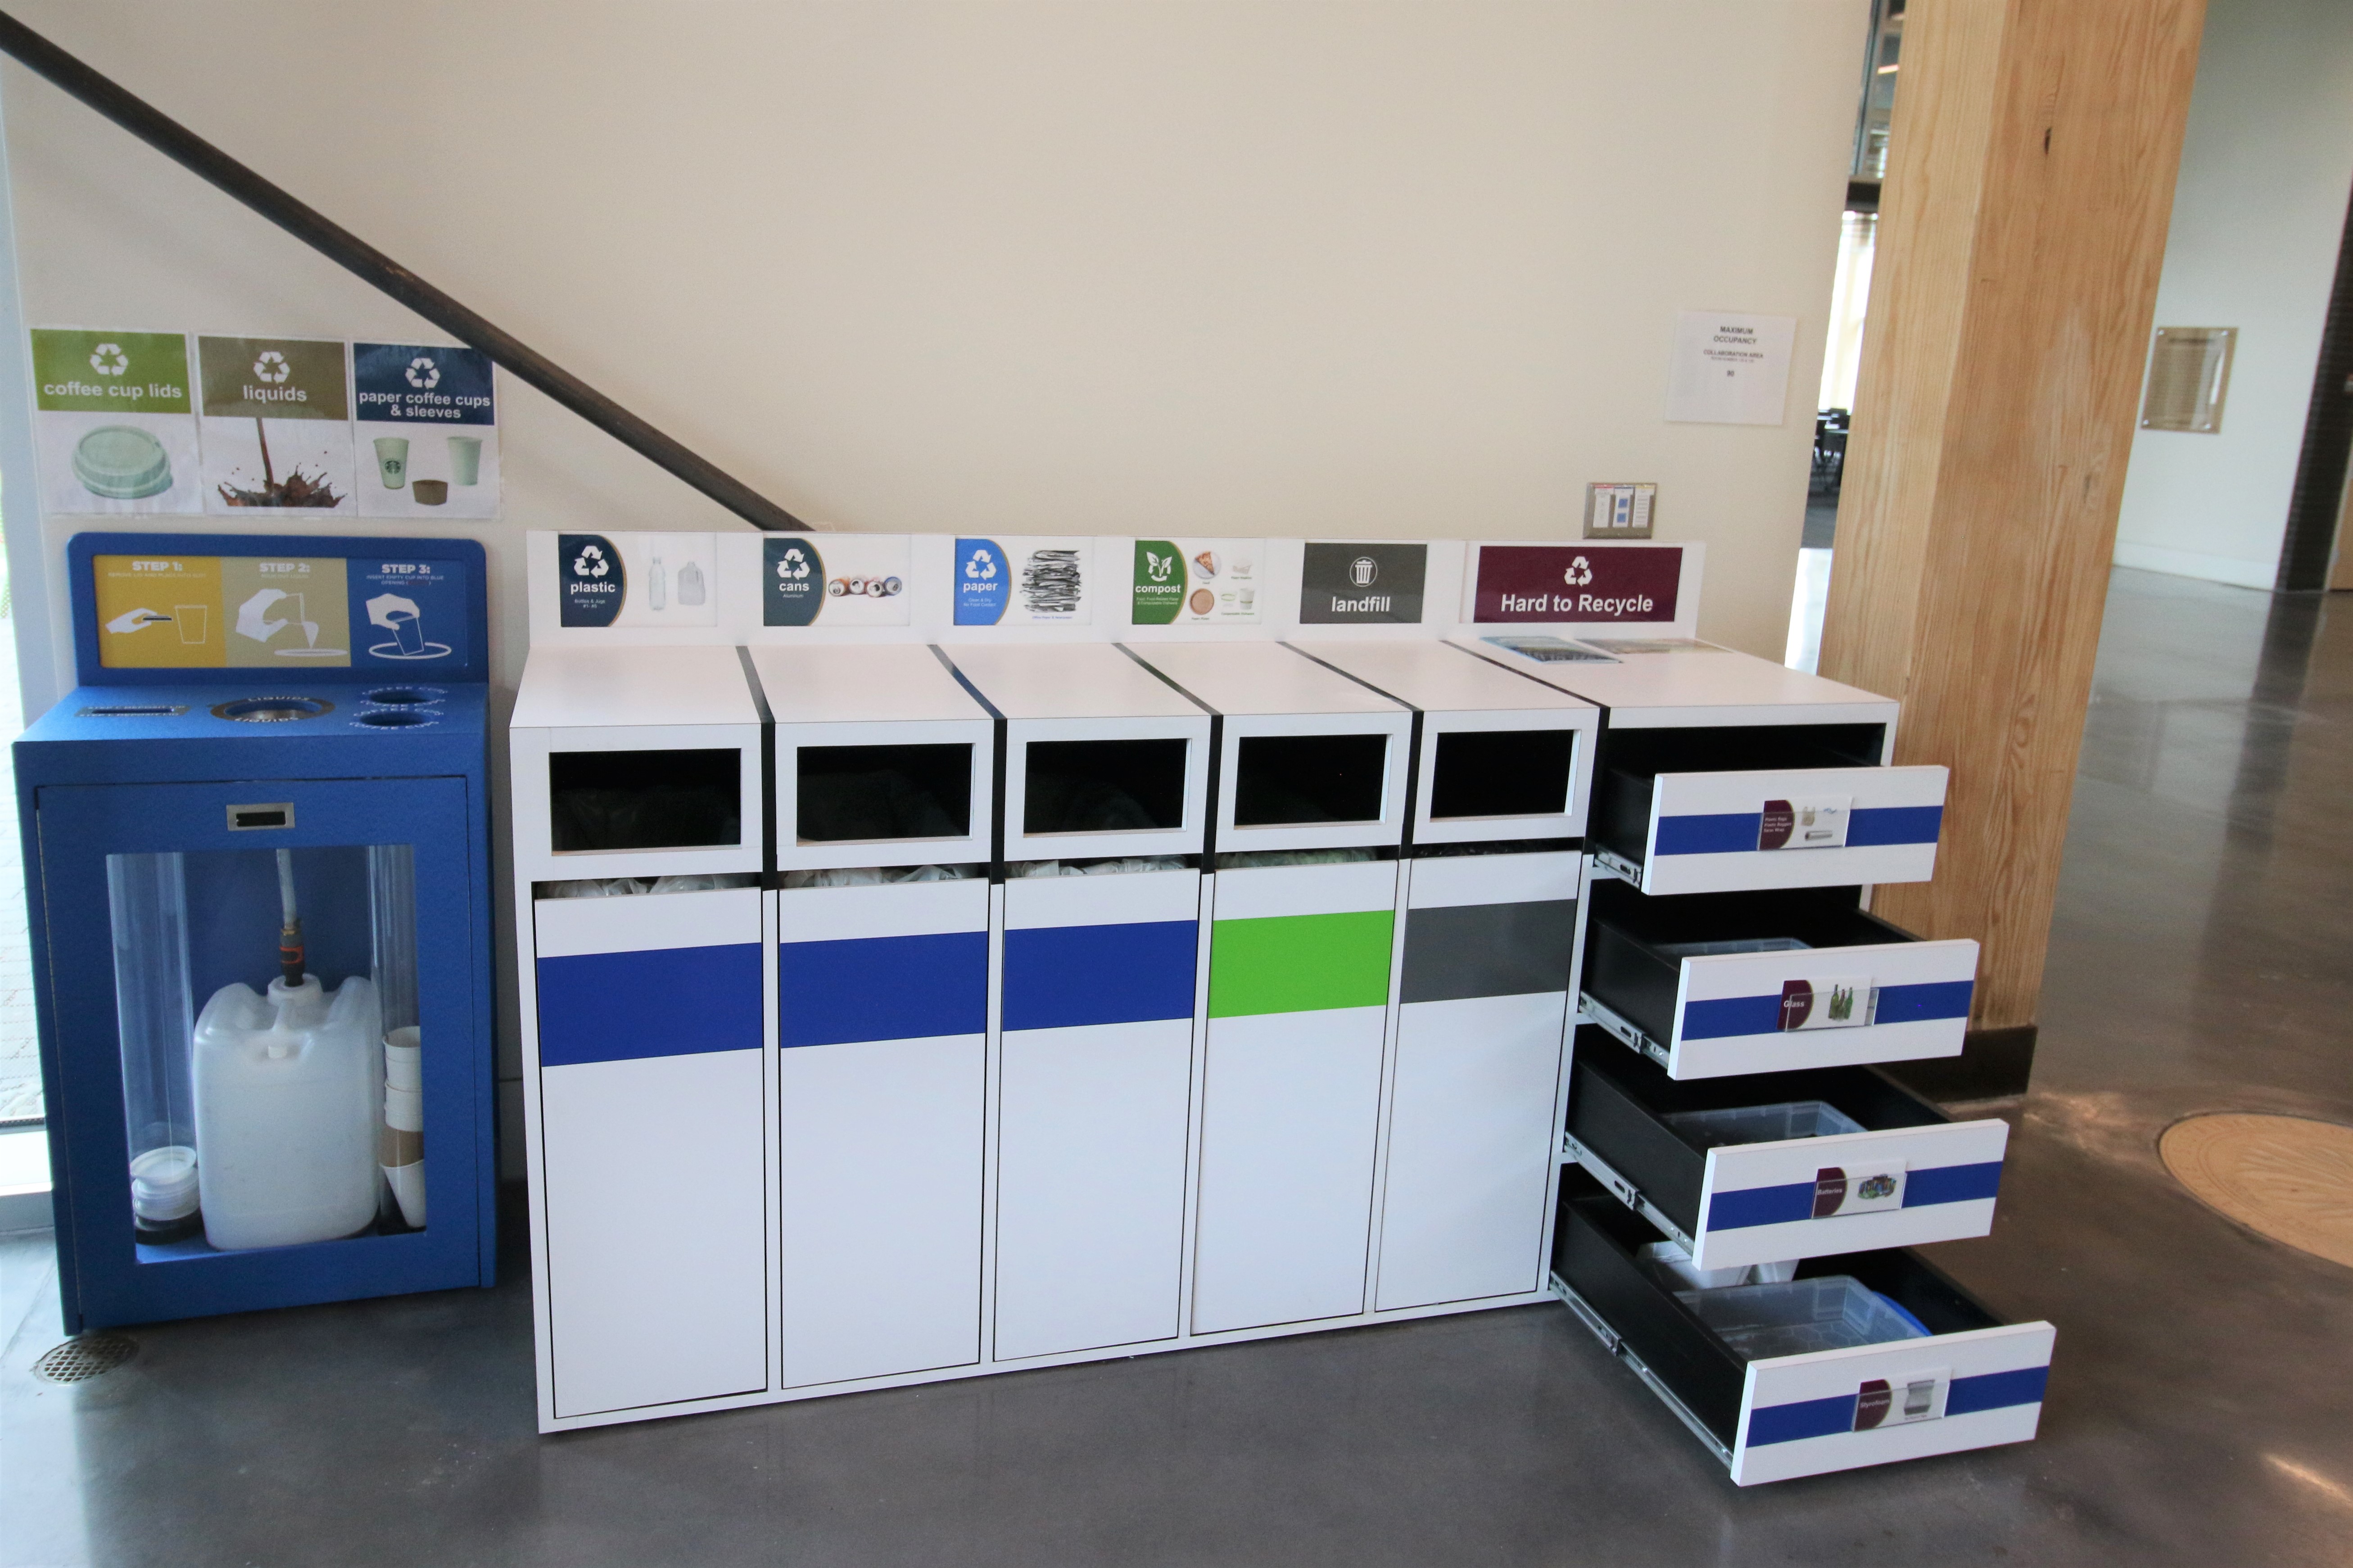 The coffee recycling station alongside one of the indoor materials management stations. The drawers can be extended to place designated hard-to-recycle products.